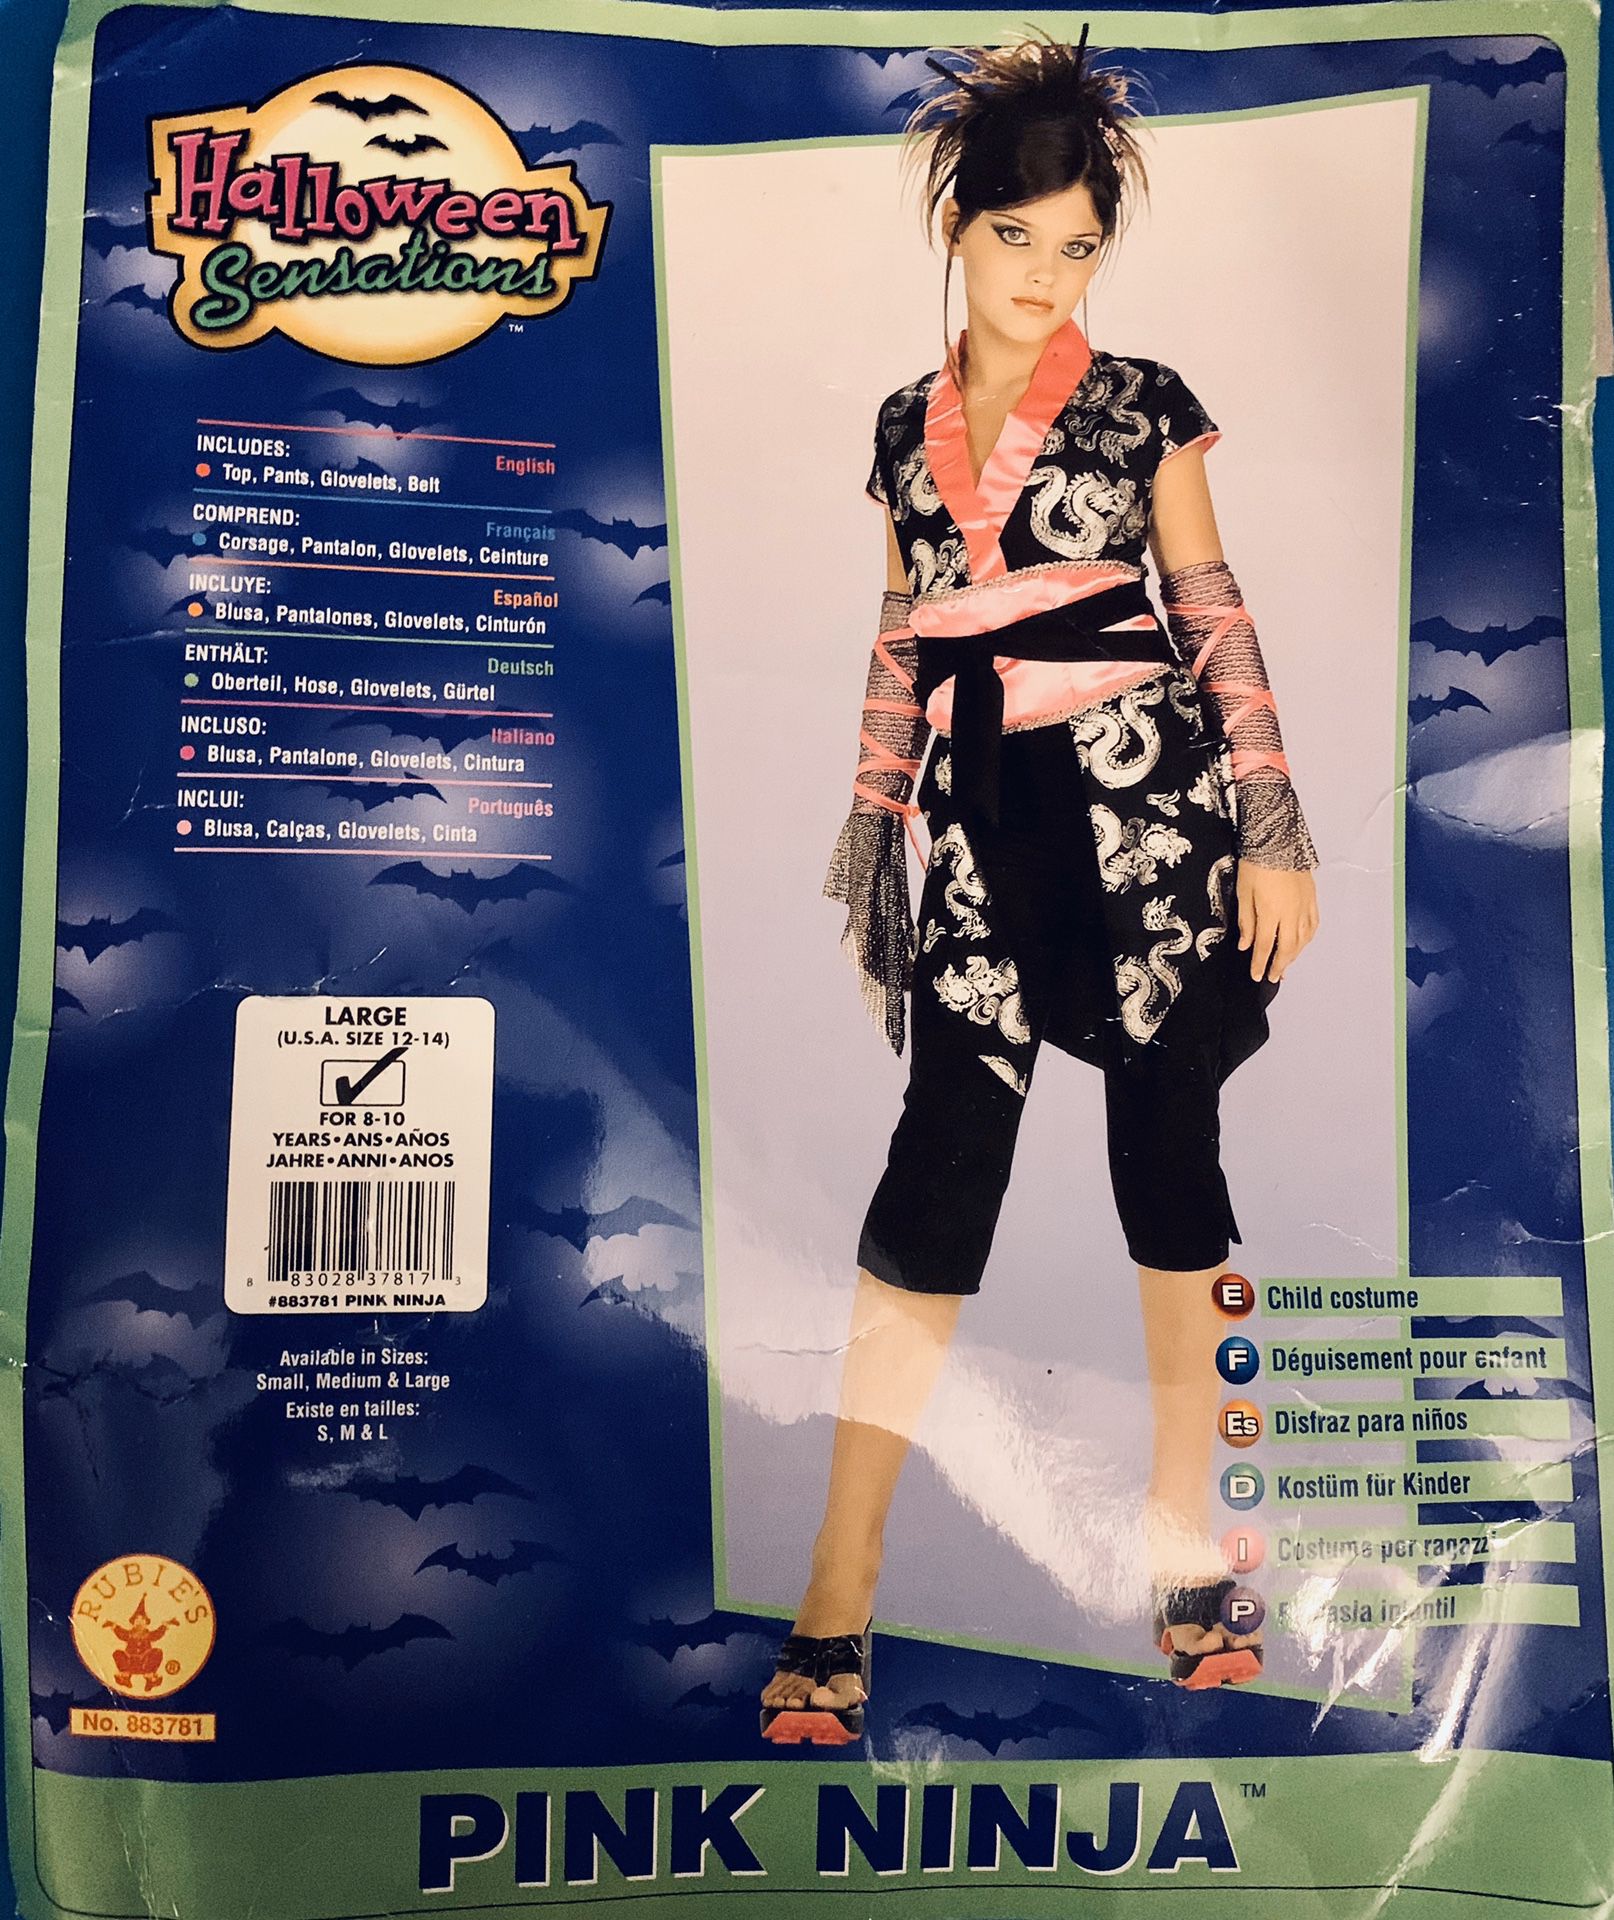 Halloween Costumes *** PRICE REDUCED***